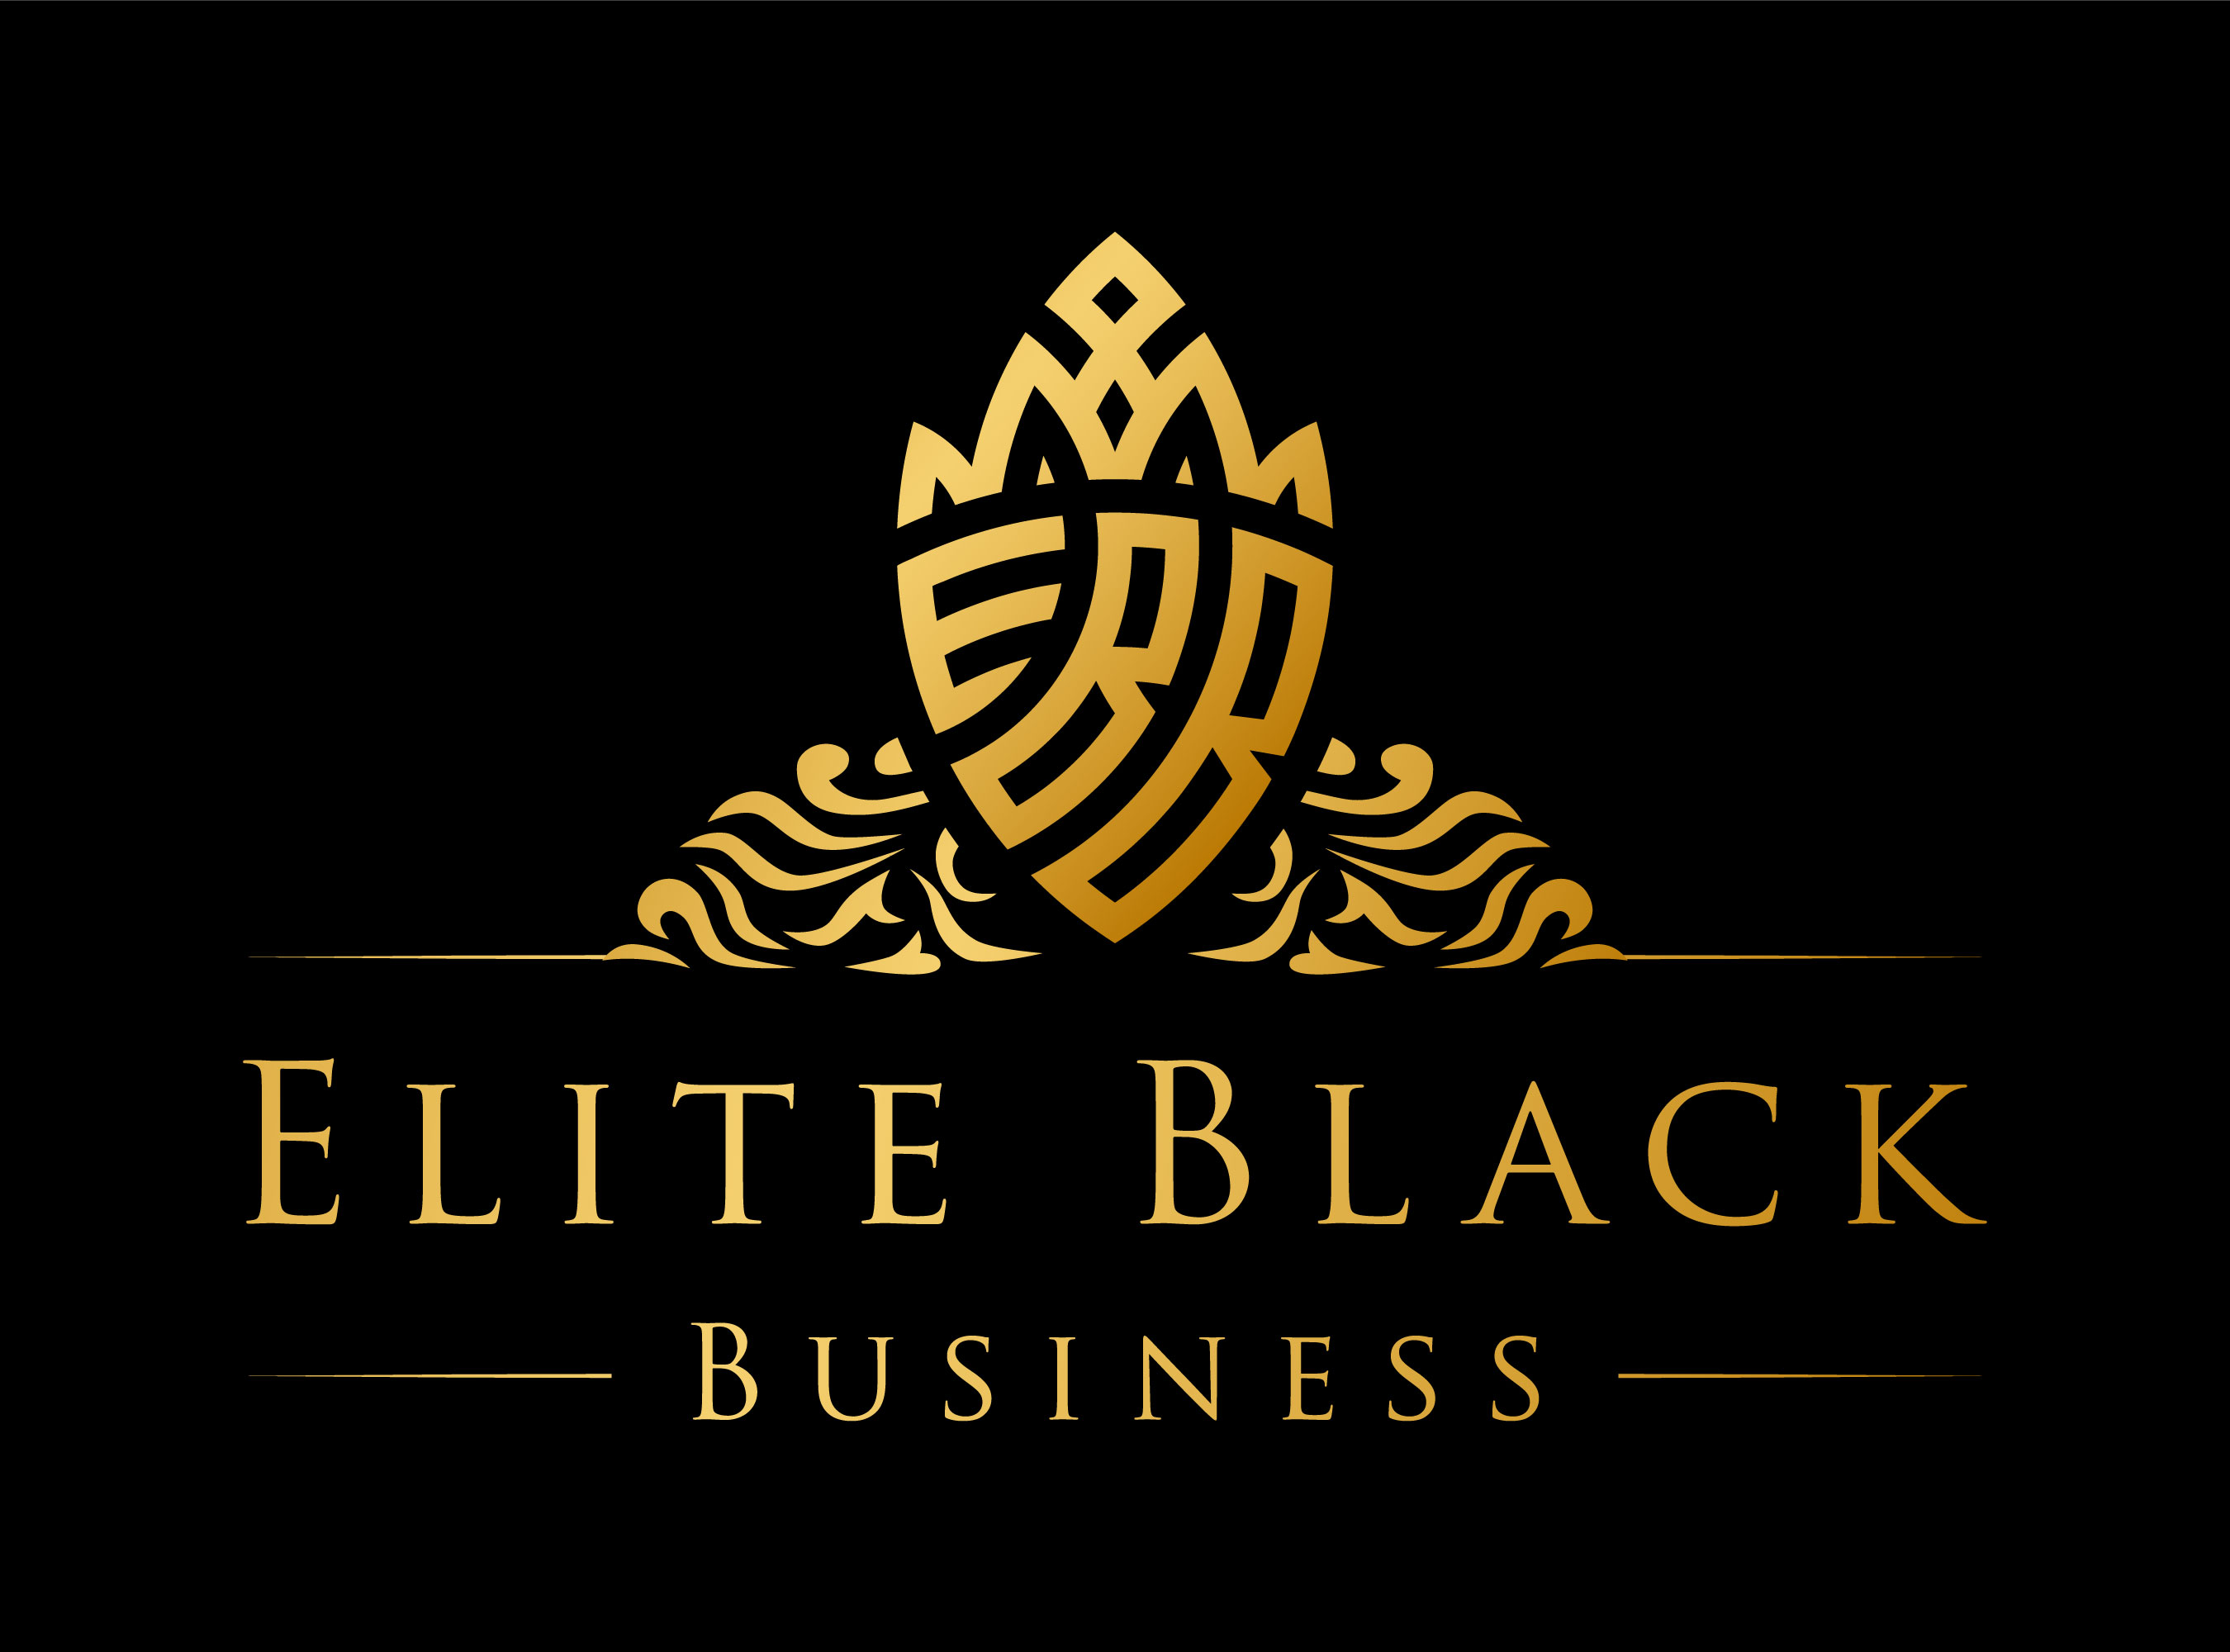 Elite Black Business Launches Online Community to Support Black and Minority-Owned Businesses